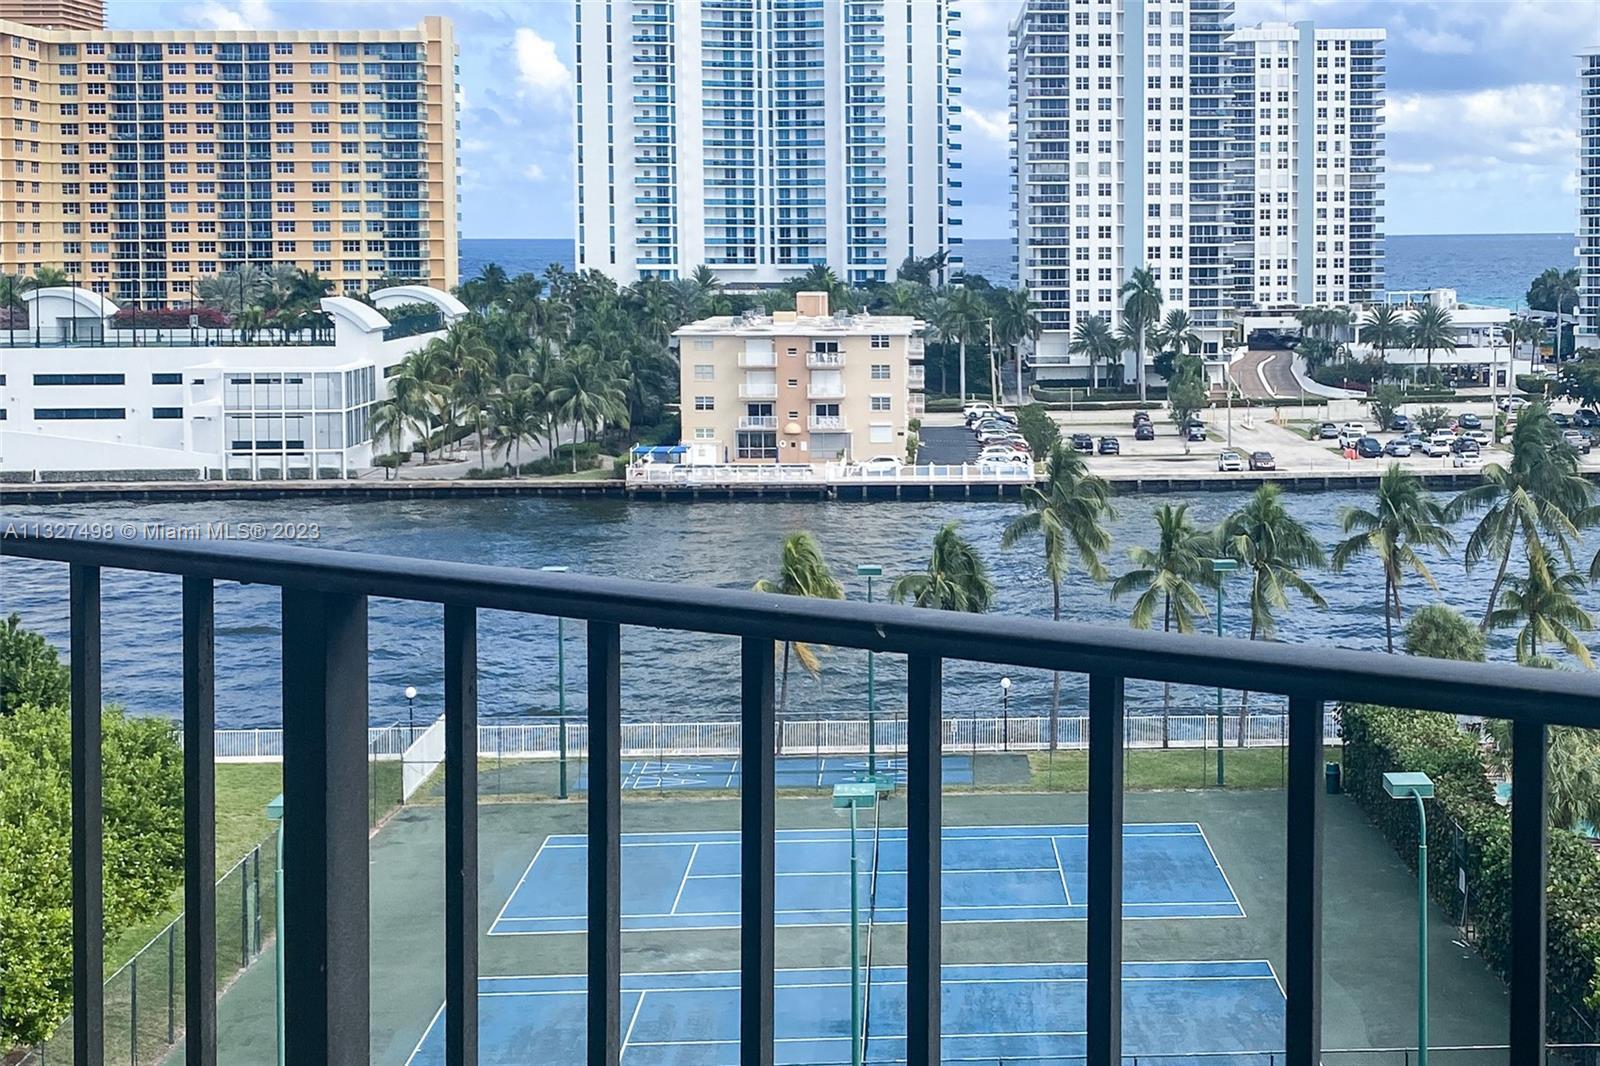 Unobstructed Intracoastal Views from floor to ceiling windows. Spacious unit can be converted into 2